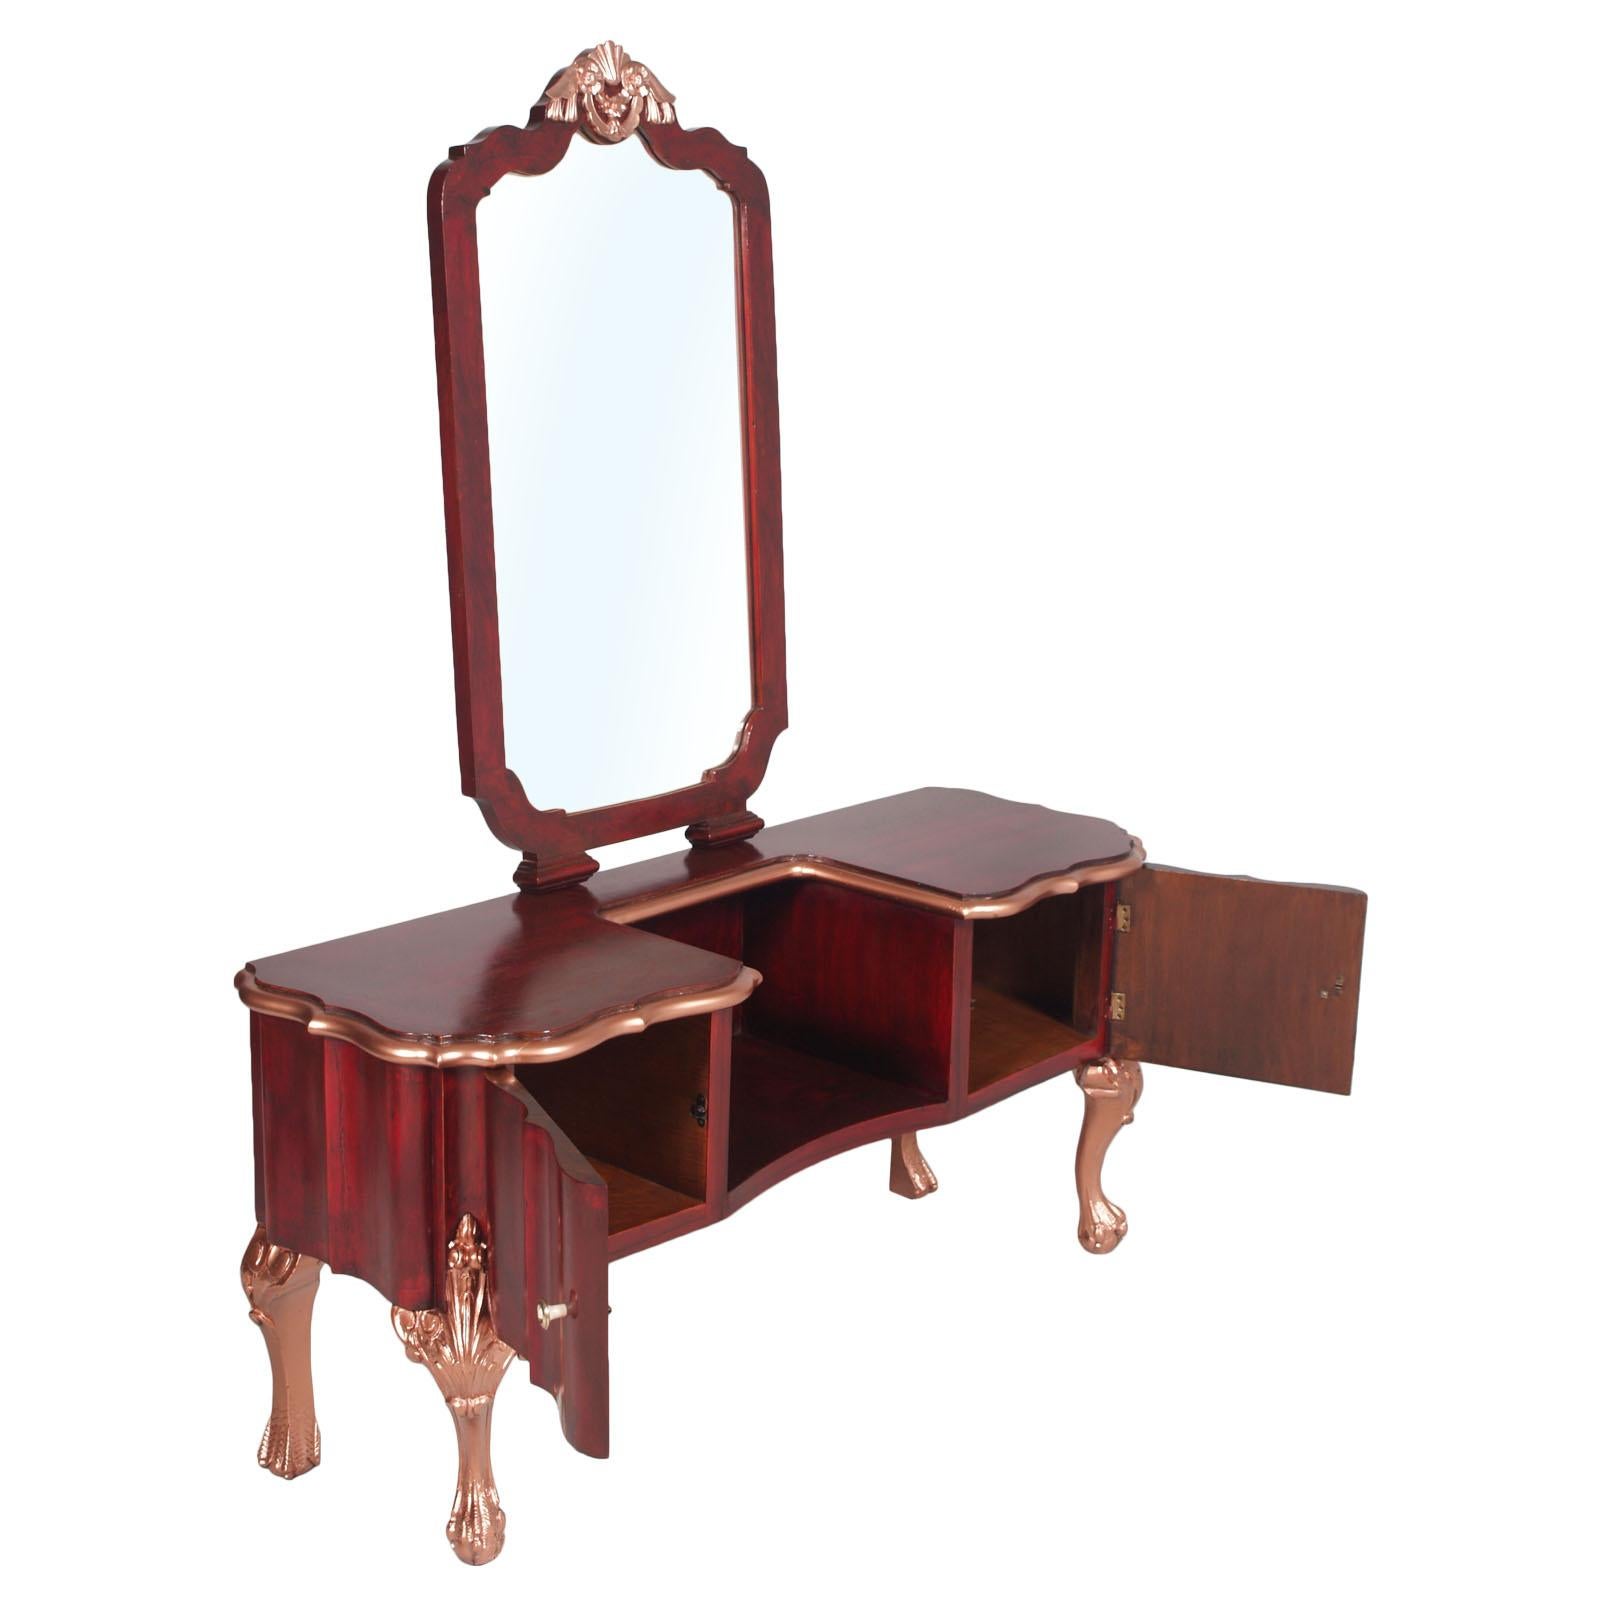 1920s a Testolini & Salviati Venetian Baroque vanity or mirrored console or dressing table, in solid carved walnut and walnut veneer.
Carving parts with copper leaf applied.
Original handles in bone and golden brass.
A precious entrance console